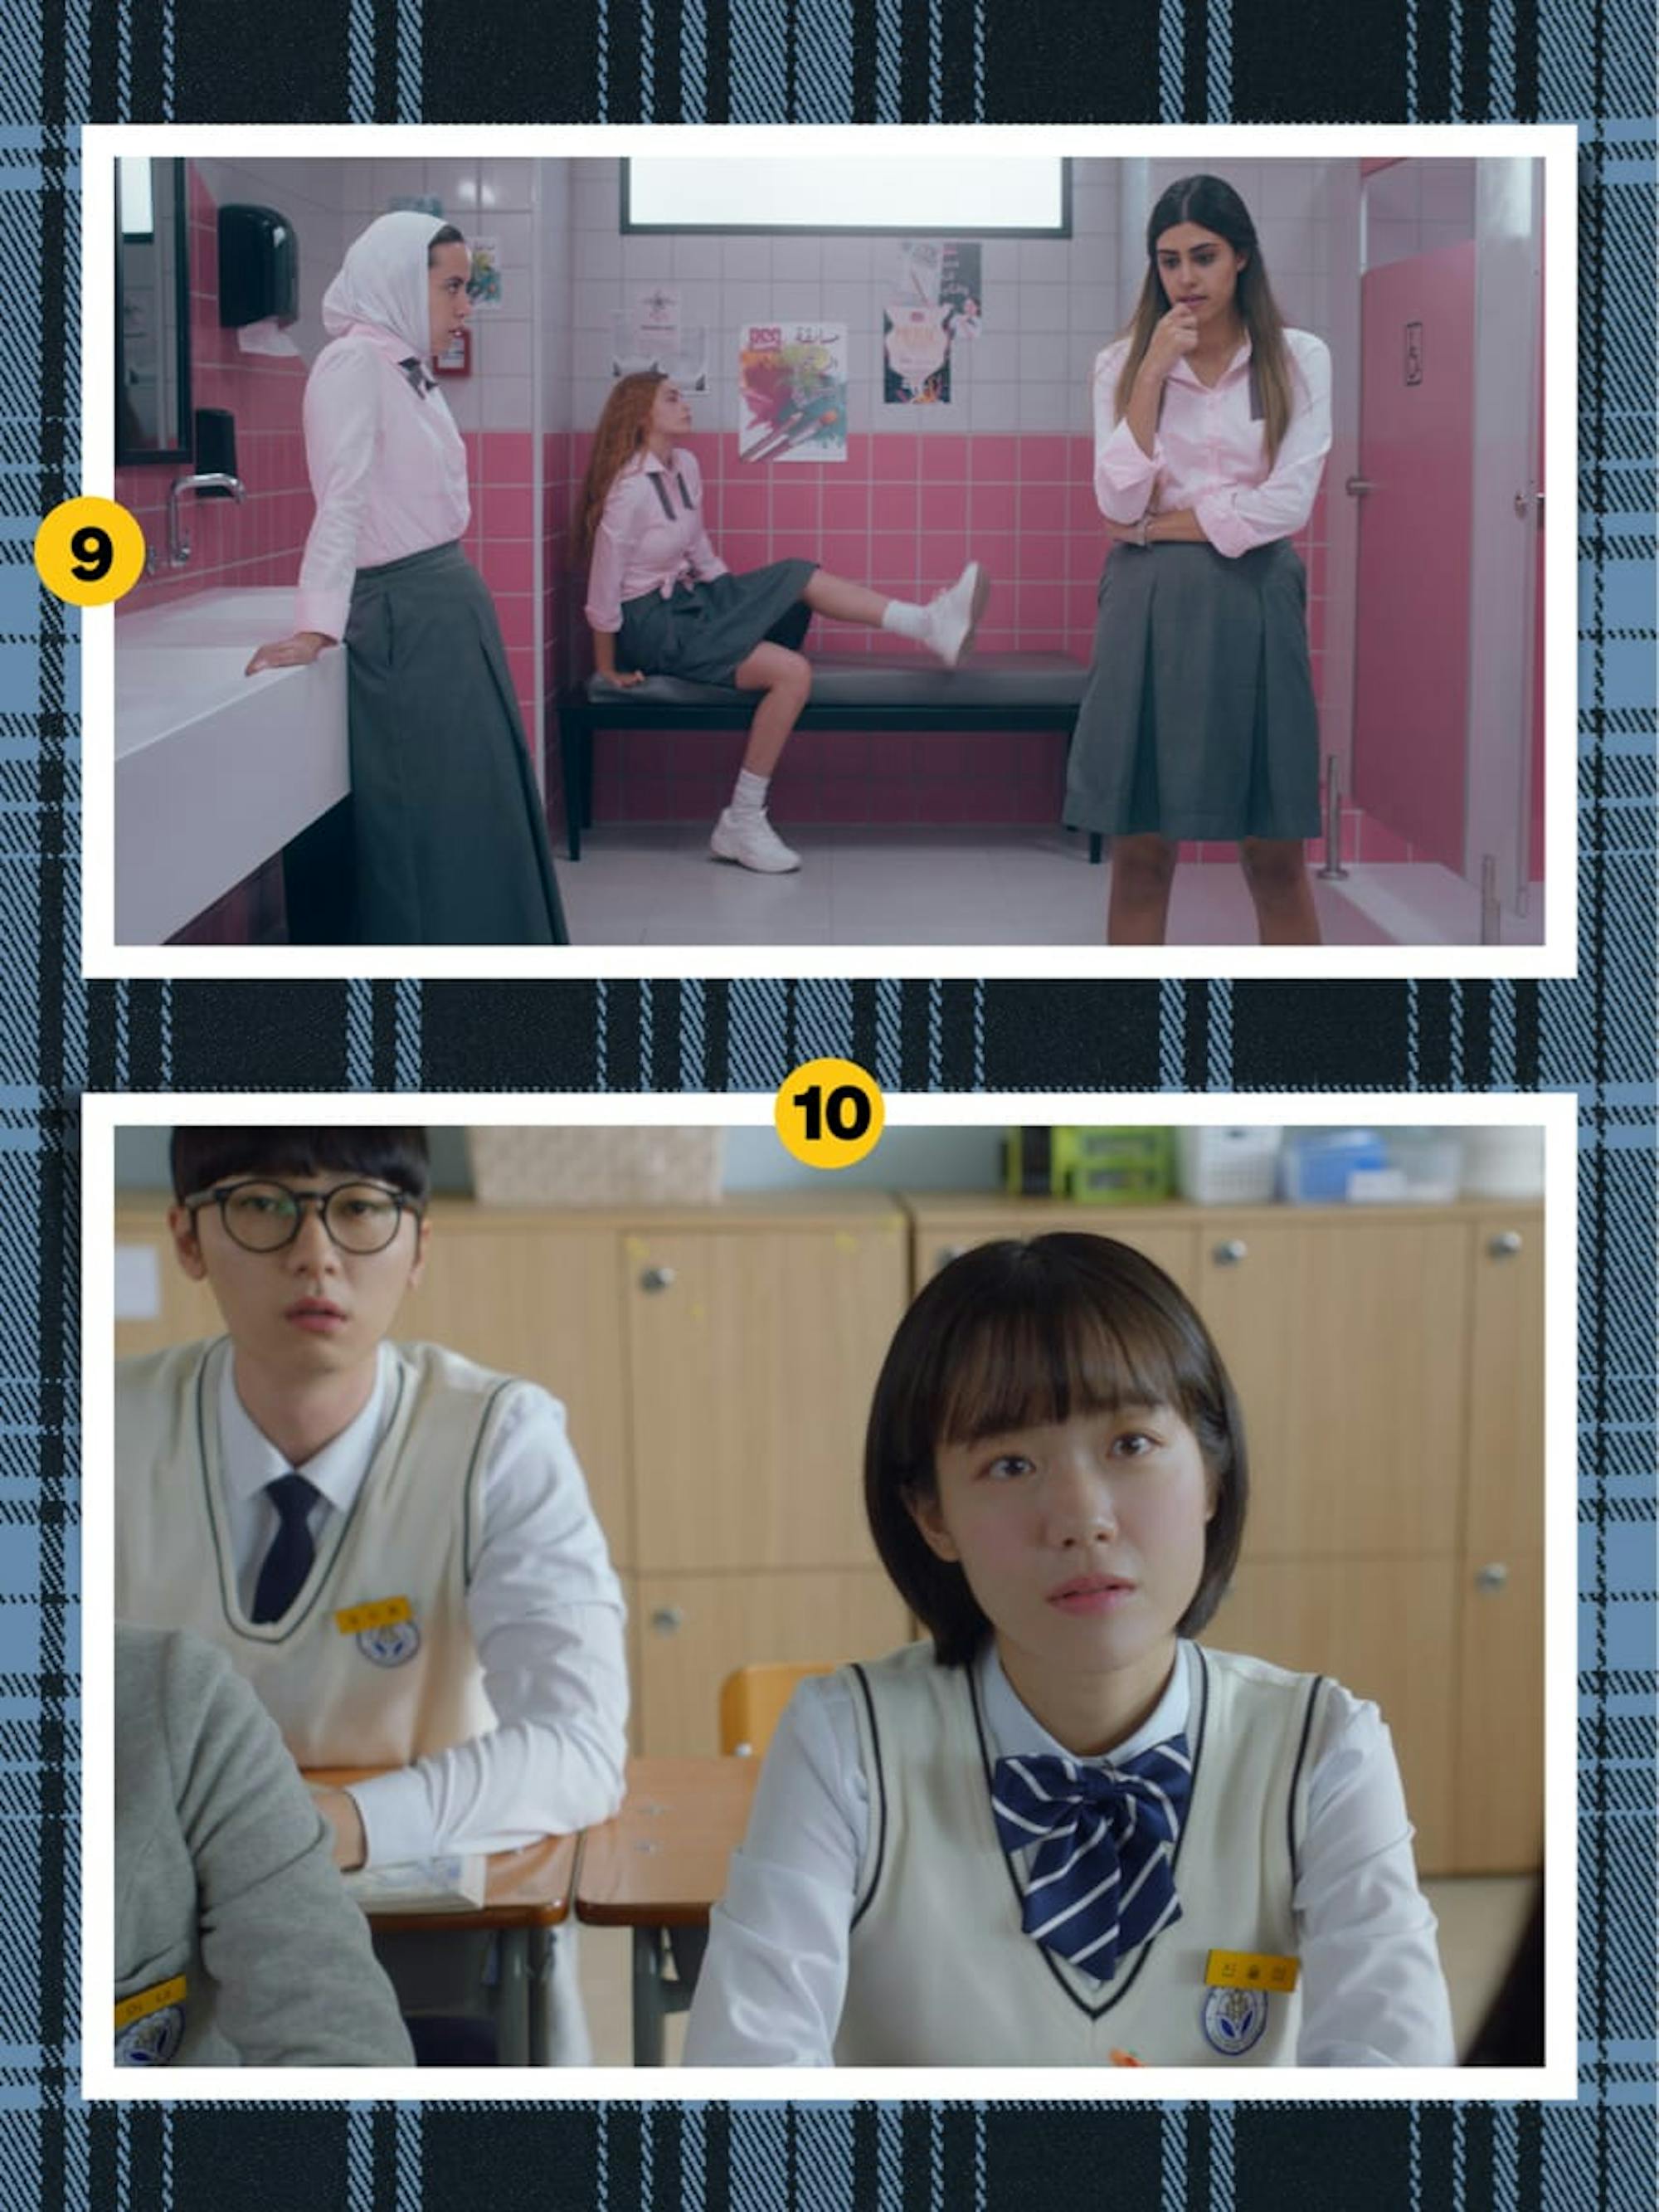 Top image: Rakeen Sa’ad, Joanna Arida, and Noor Taher from Alrawabi School for Girls wear their pink-topped, grey-skirted uniforms in a pink-tiled bathroom. Bottom image: Jeong Jin-Hwan and So Joo-yoon from A Love So Beautiful sit in their classroom in uniform; a white button down with a blue and white striped necktie and a cream-colored sweater vest. A little yellow pin is on their sweaters as well. They look ahead, probably at the teacher. 